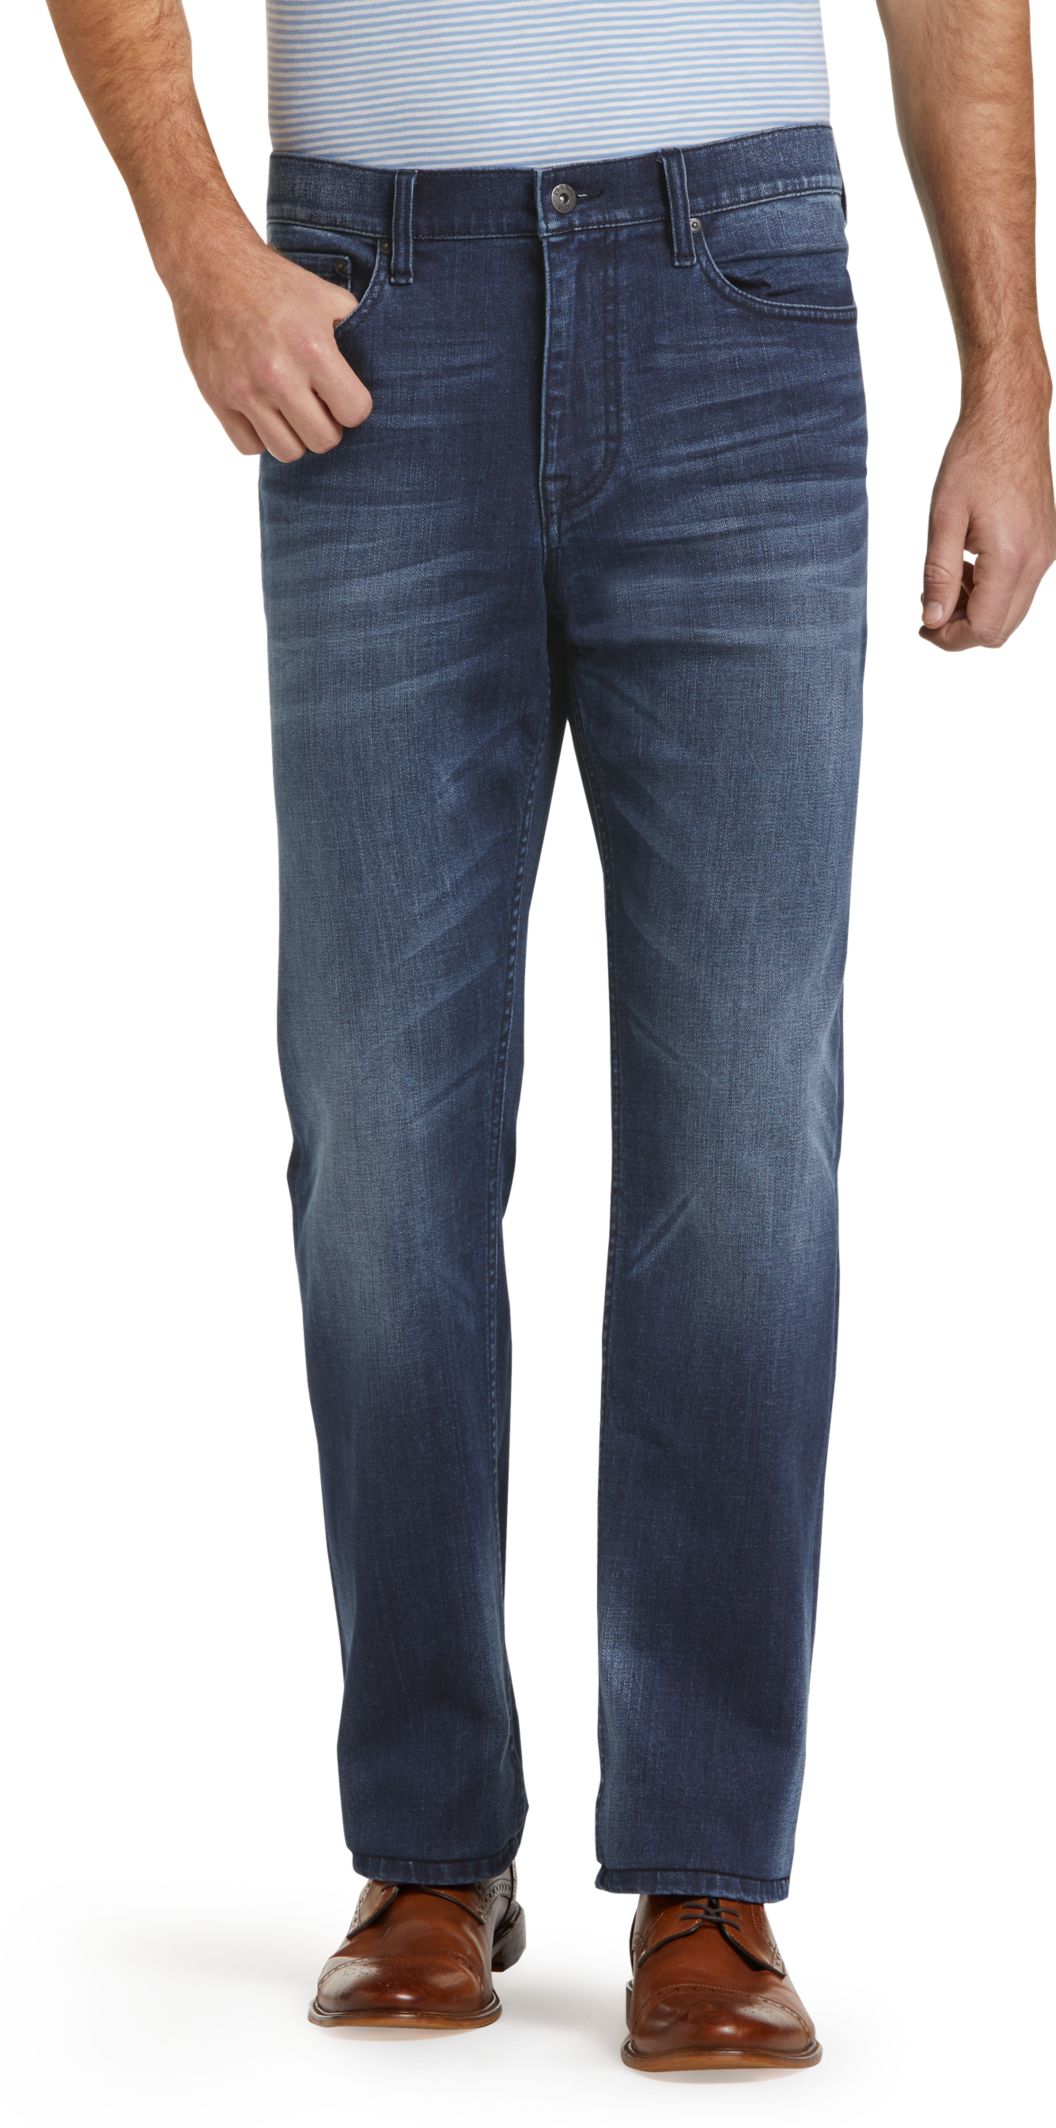 1905 Collection Tailored Fit Medium Wash Jeans - All Pants | Jos A Bank